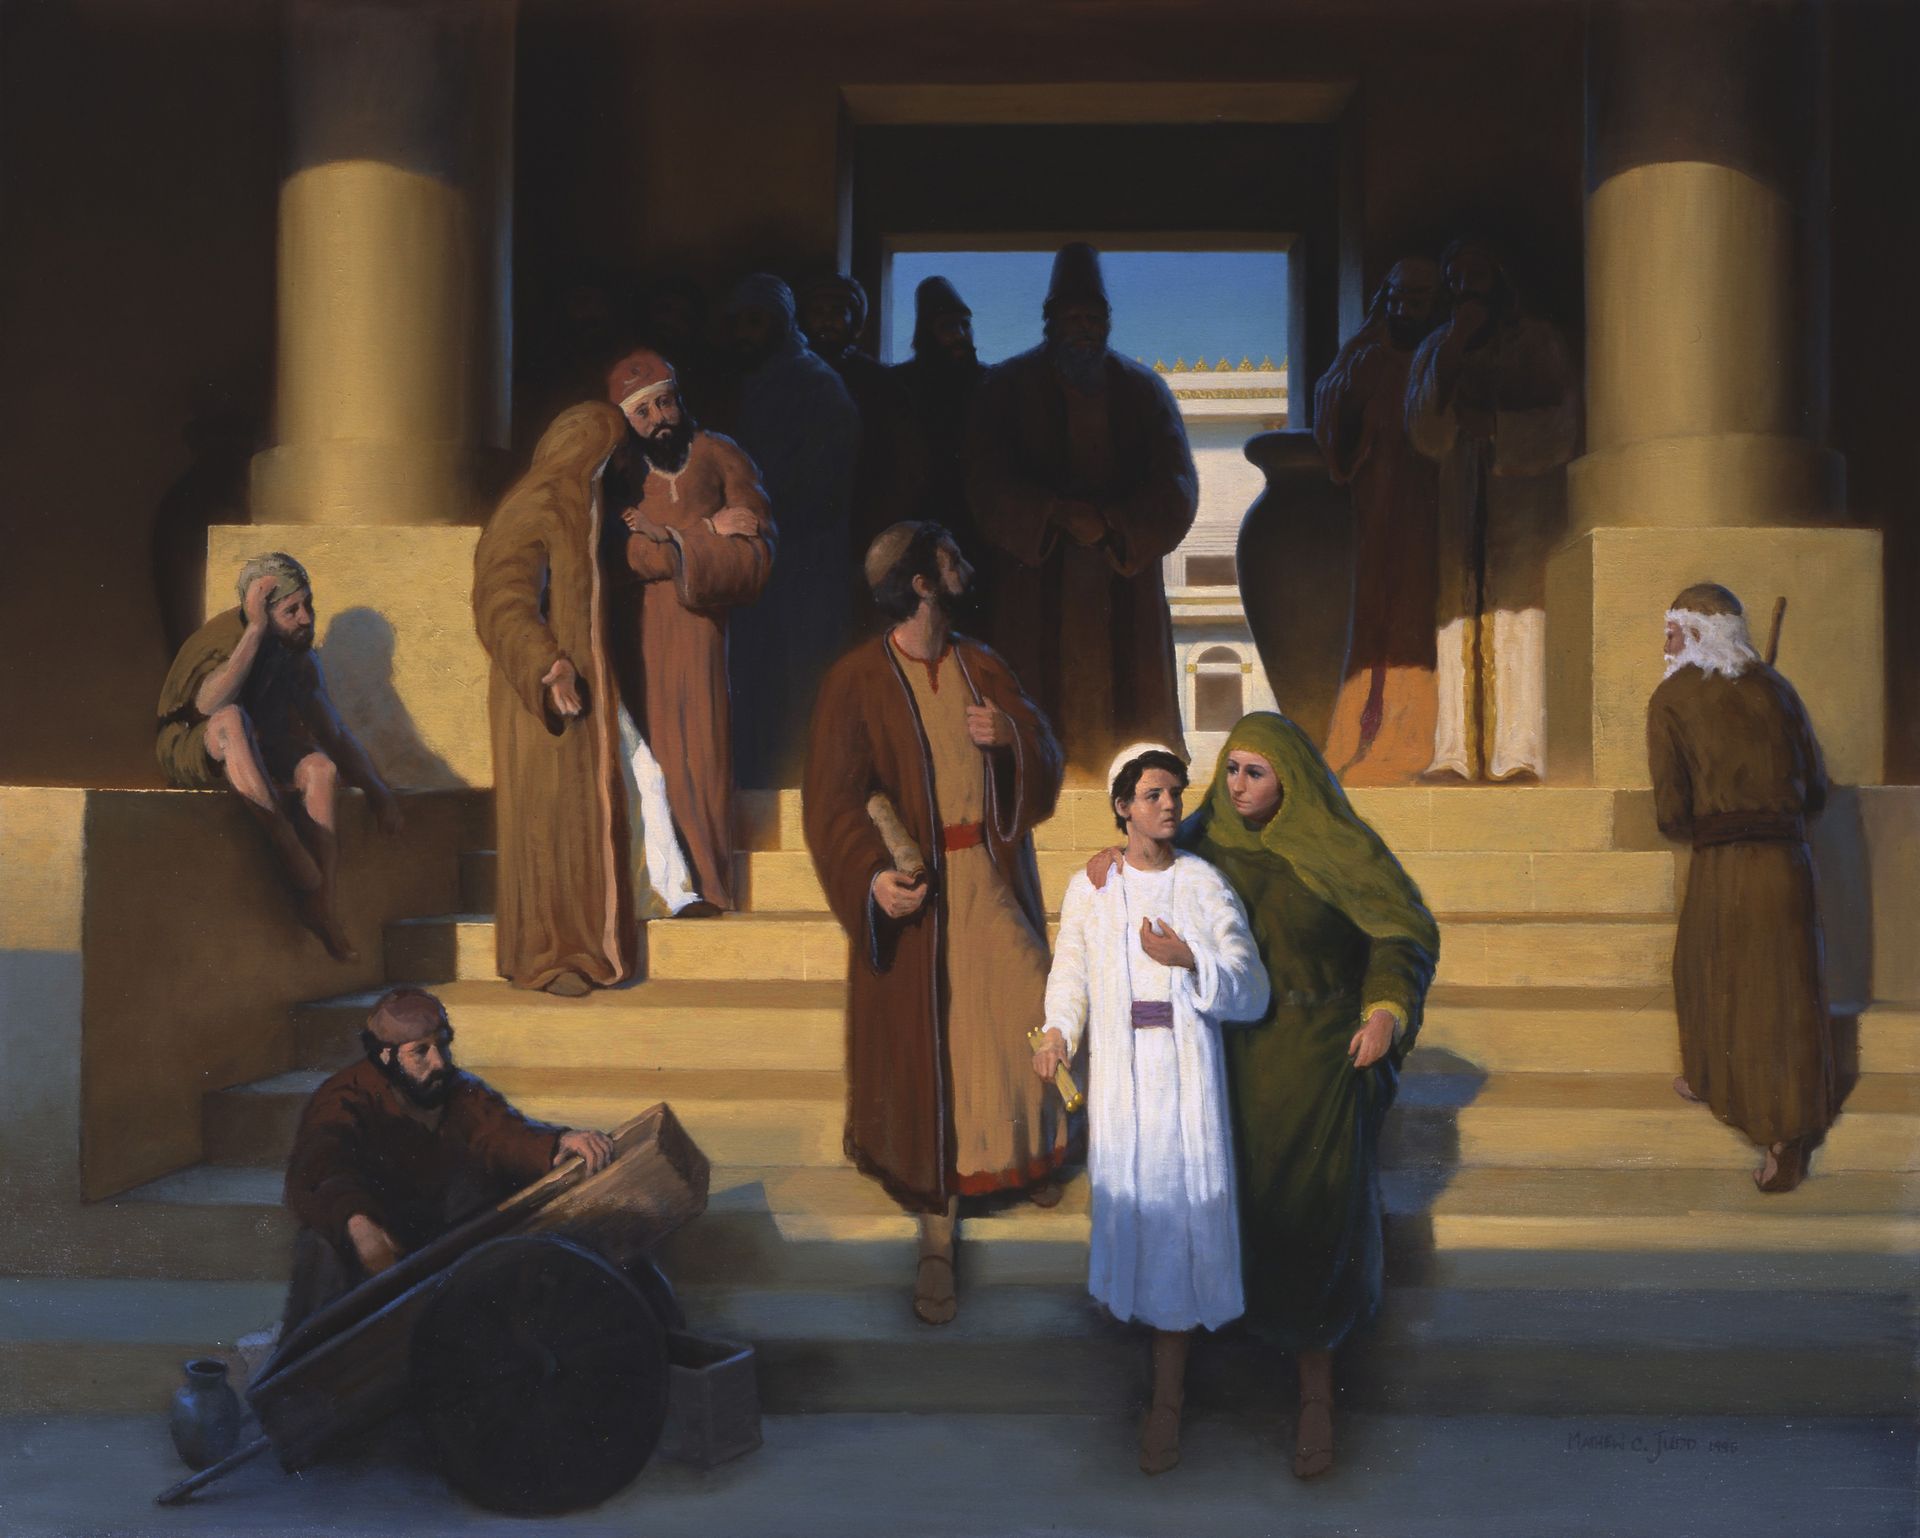 The Young Jesus Coming Out of the Temple with Mary and Joseph, by Matthew Judd